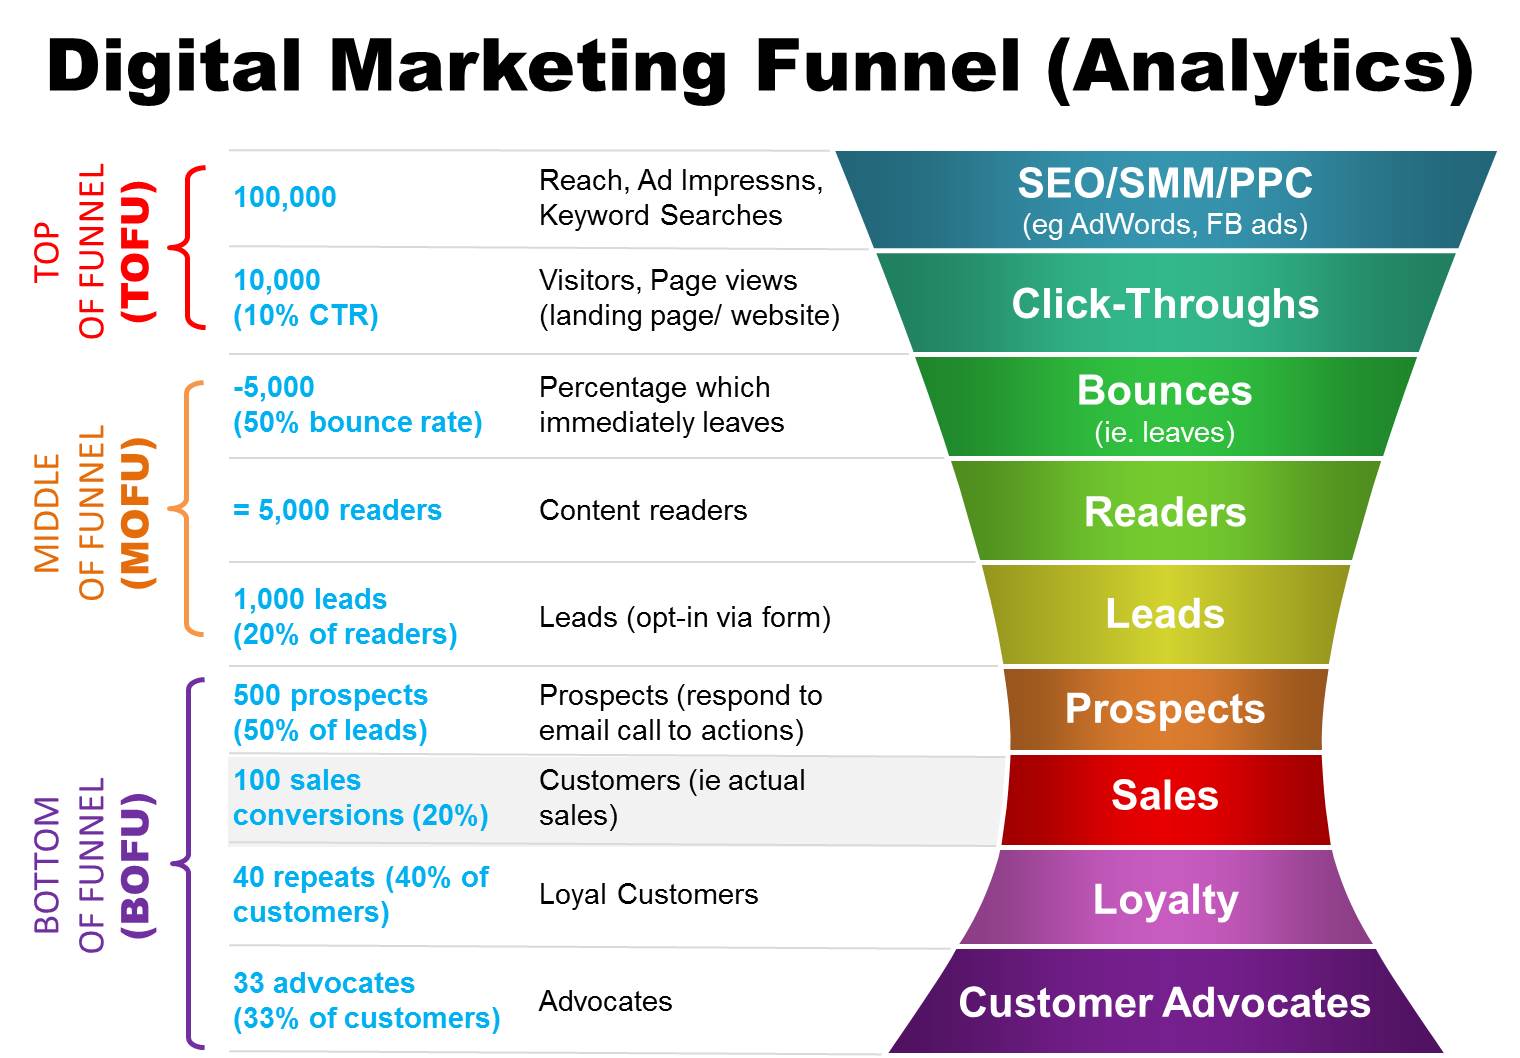 How to Optimize Your Digital Marketing Funnel | Cooler Insights